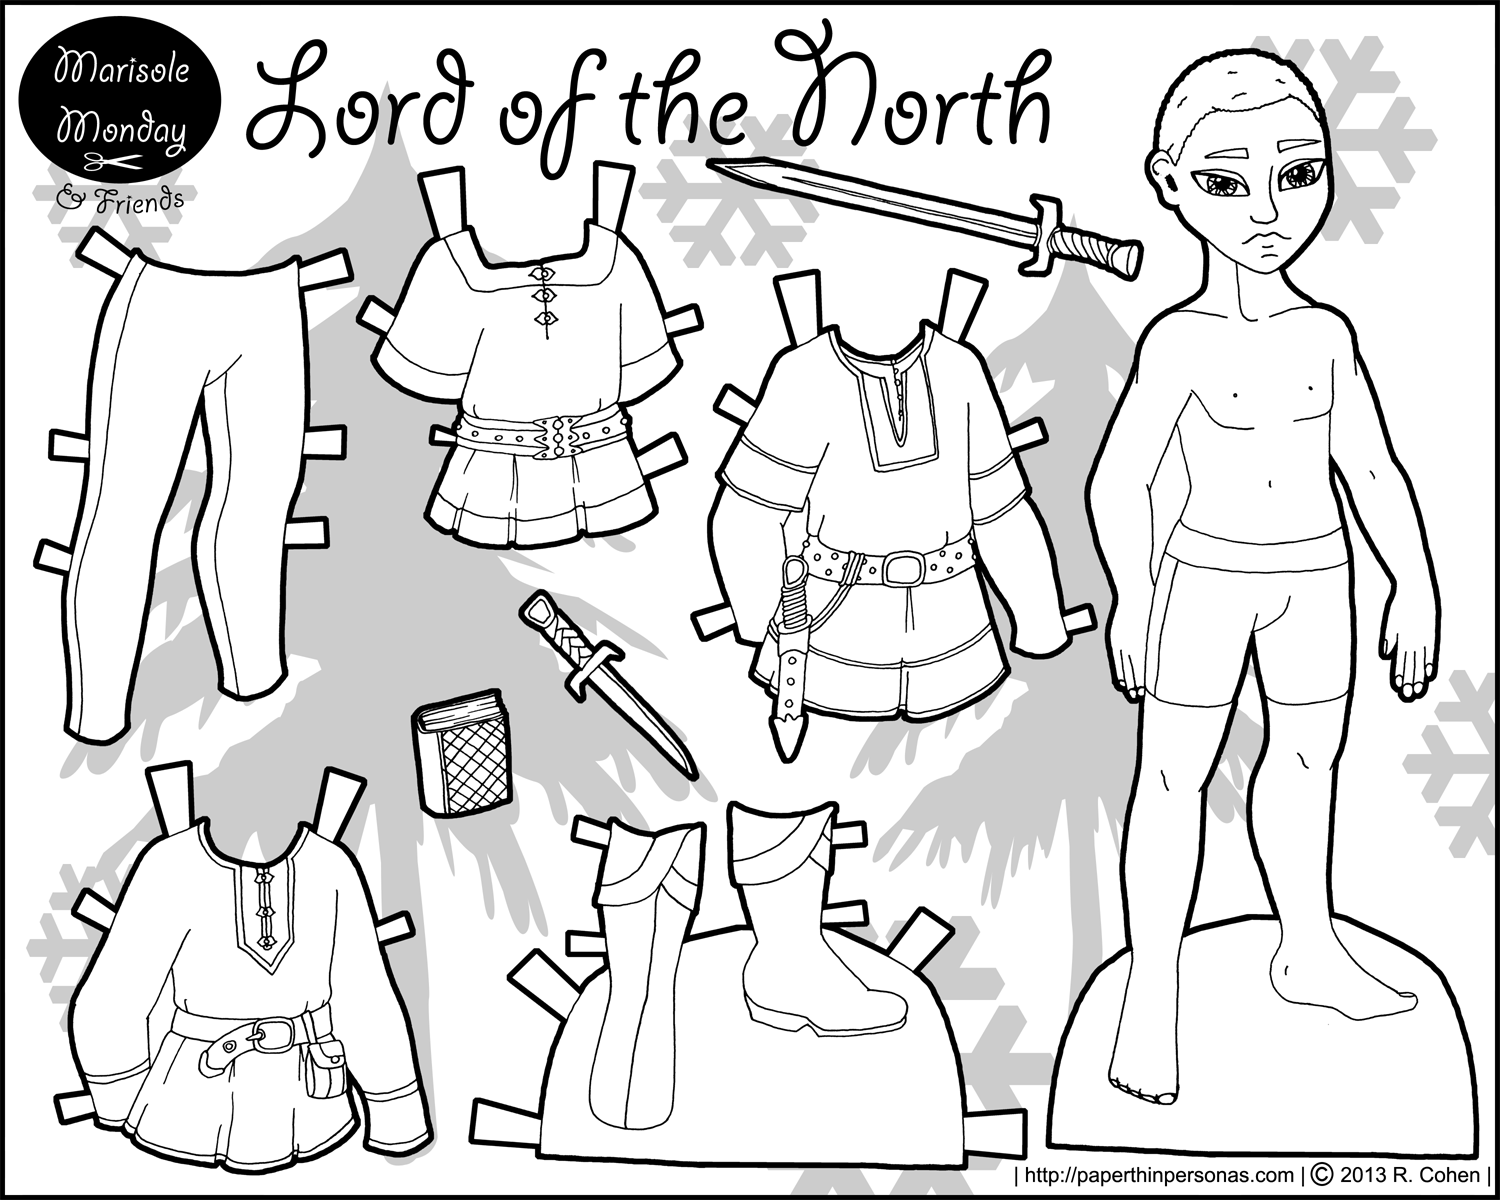 paper dressing up dolls marisole monday lord of the north paper thin personas dolls dressing up paper 